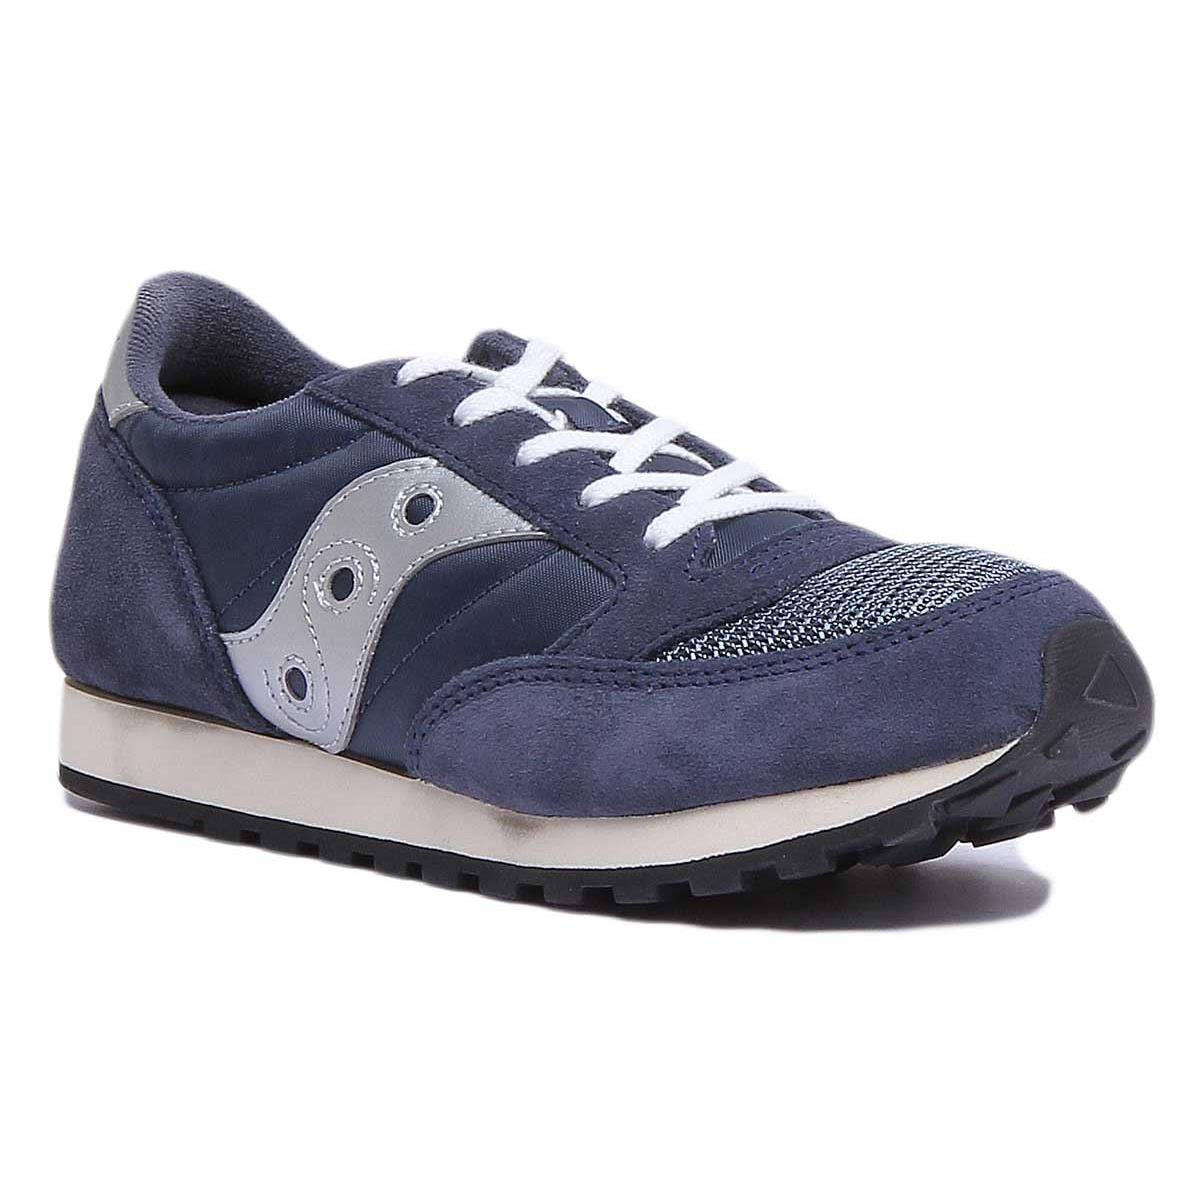 Saucony Jazz Sau Vintage Classic Lace Up Sneakers In Navy US 5 - 13 Navy